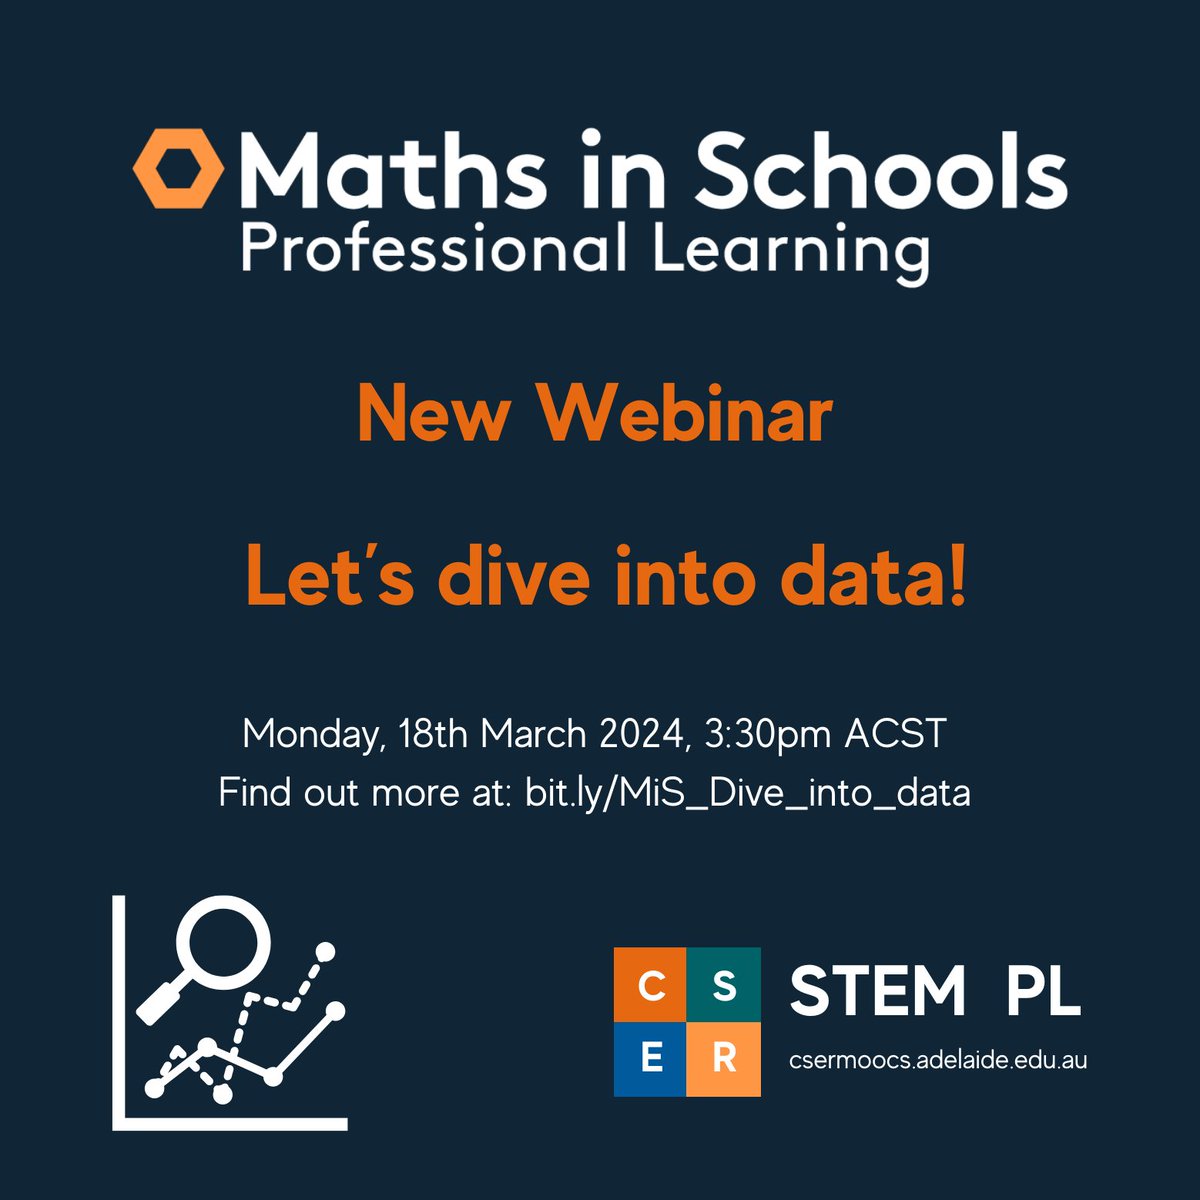 You're invited! 'Let's dive into data!' In this webinar, we will unpack different ways data can be acquired, sorted, interpreted, represented & explore the shared focus between Mathematics & Digital Technologies. 18 March 3:30pm ACST bit.ly/MiS_Dive_into_… #mathsinschools